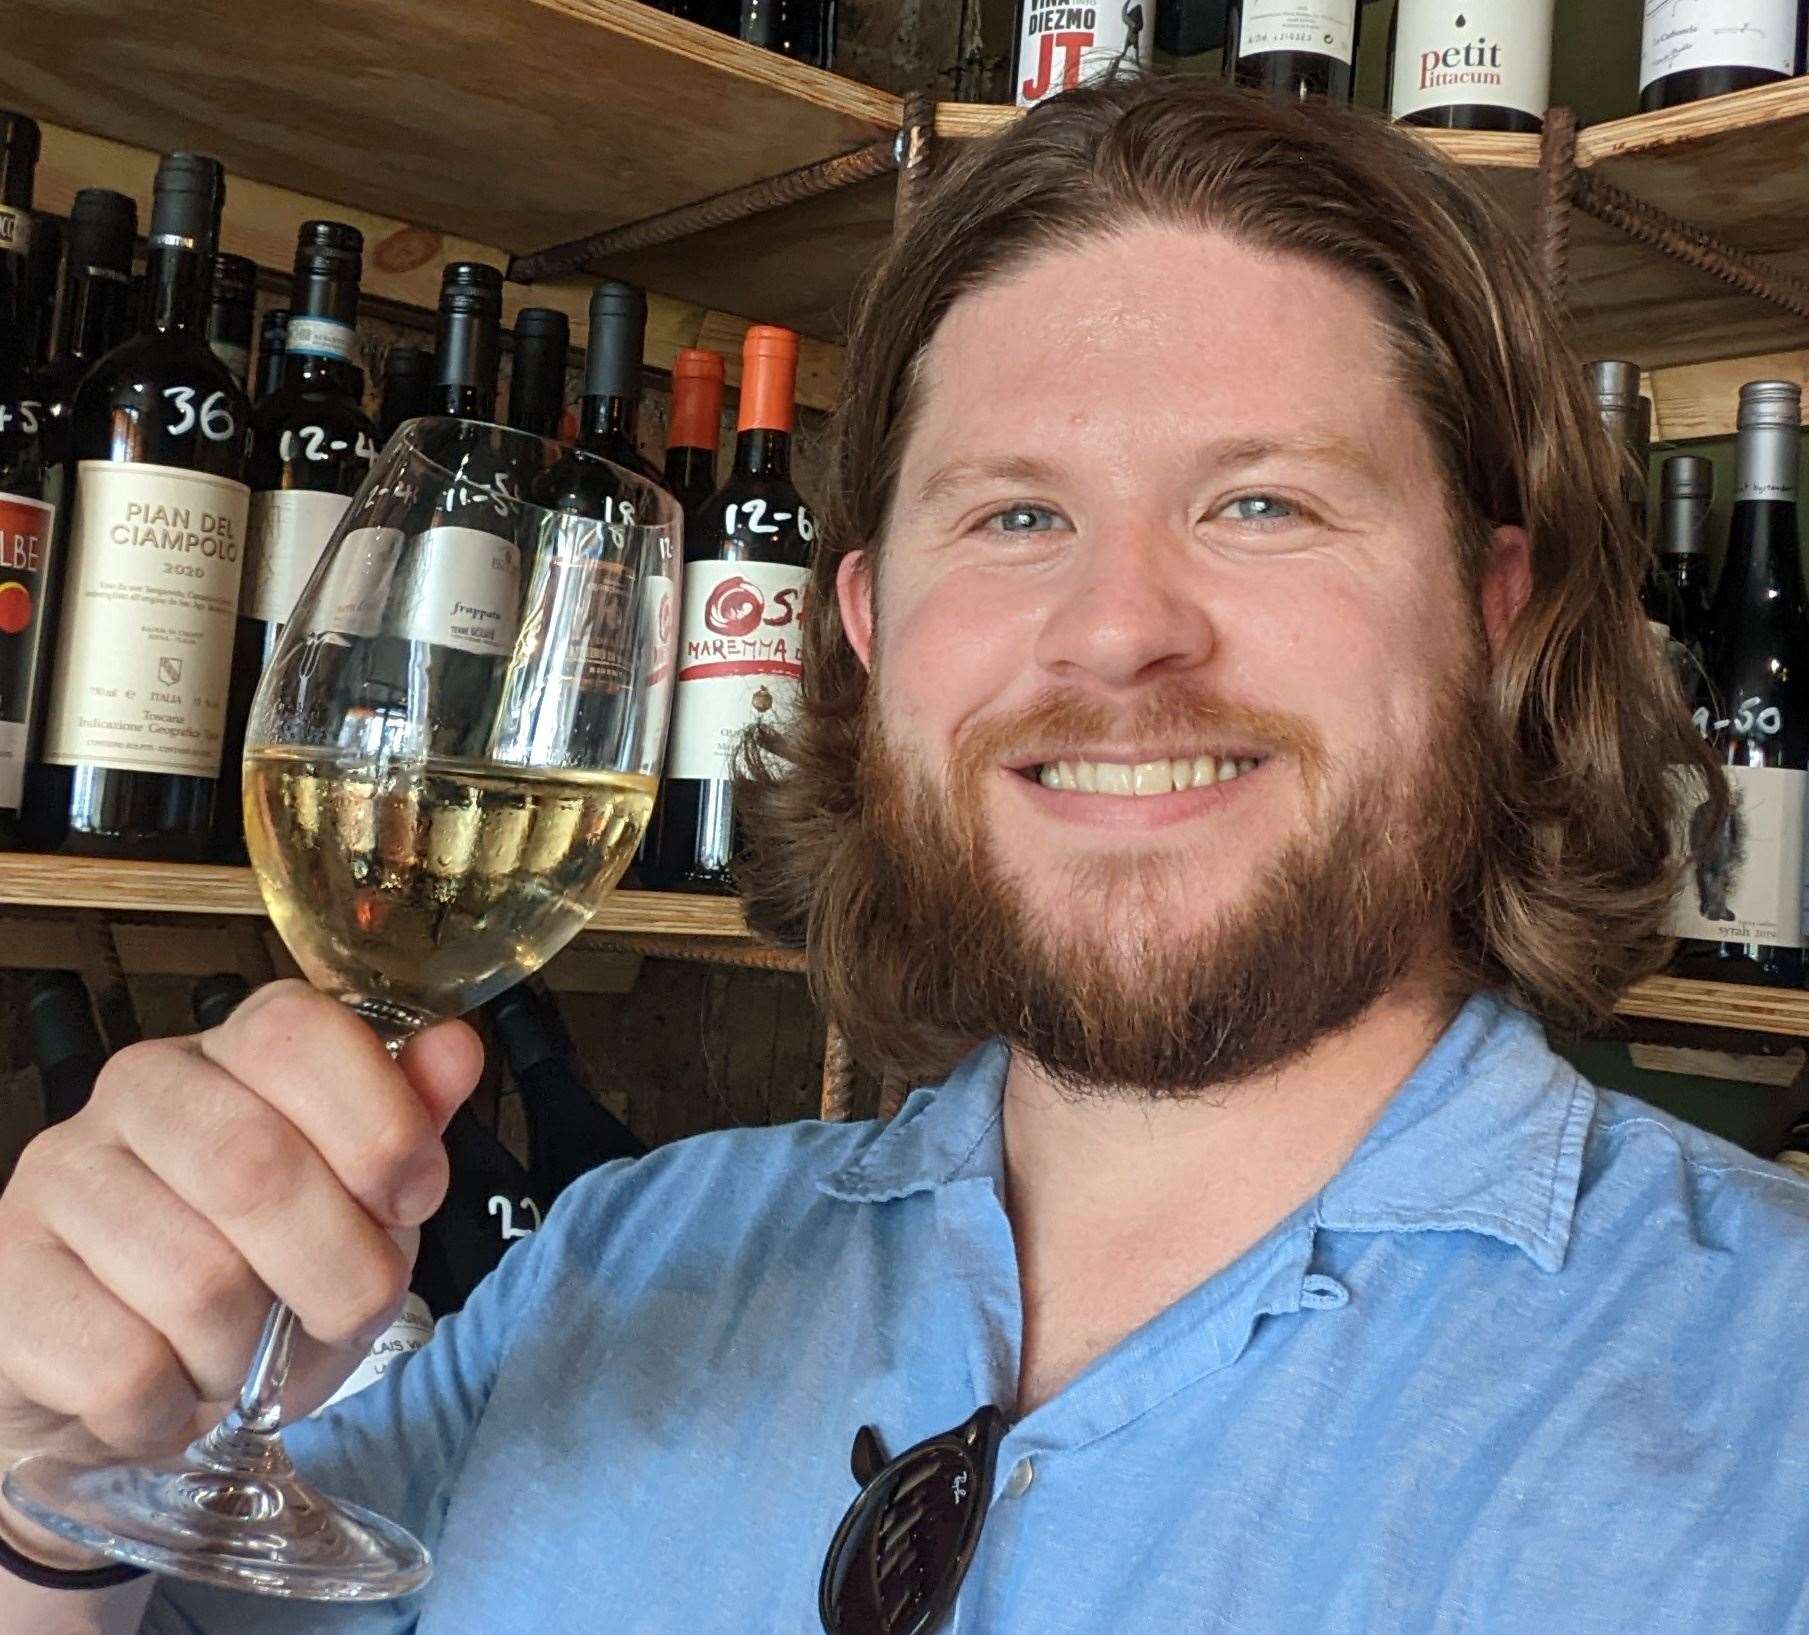 Reporter Rhys Griffiths raises a glass at a new independent wine shop and tasting room in Sandgate